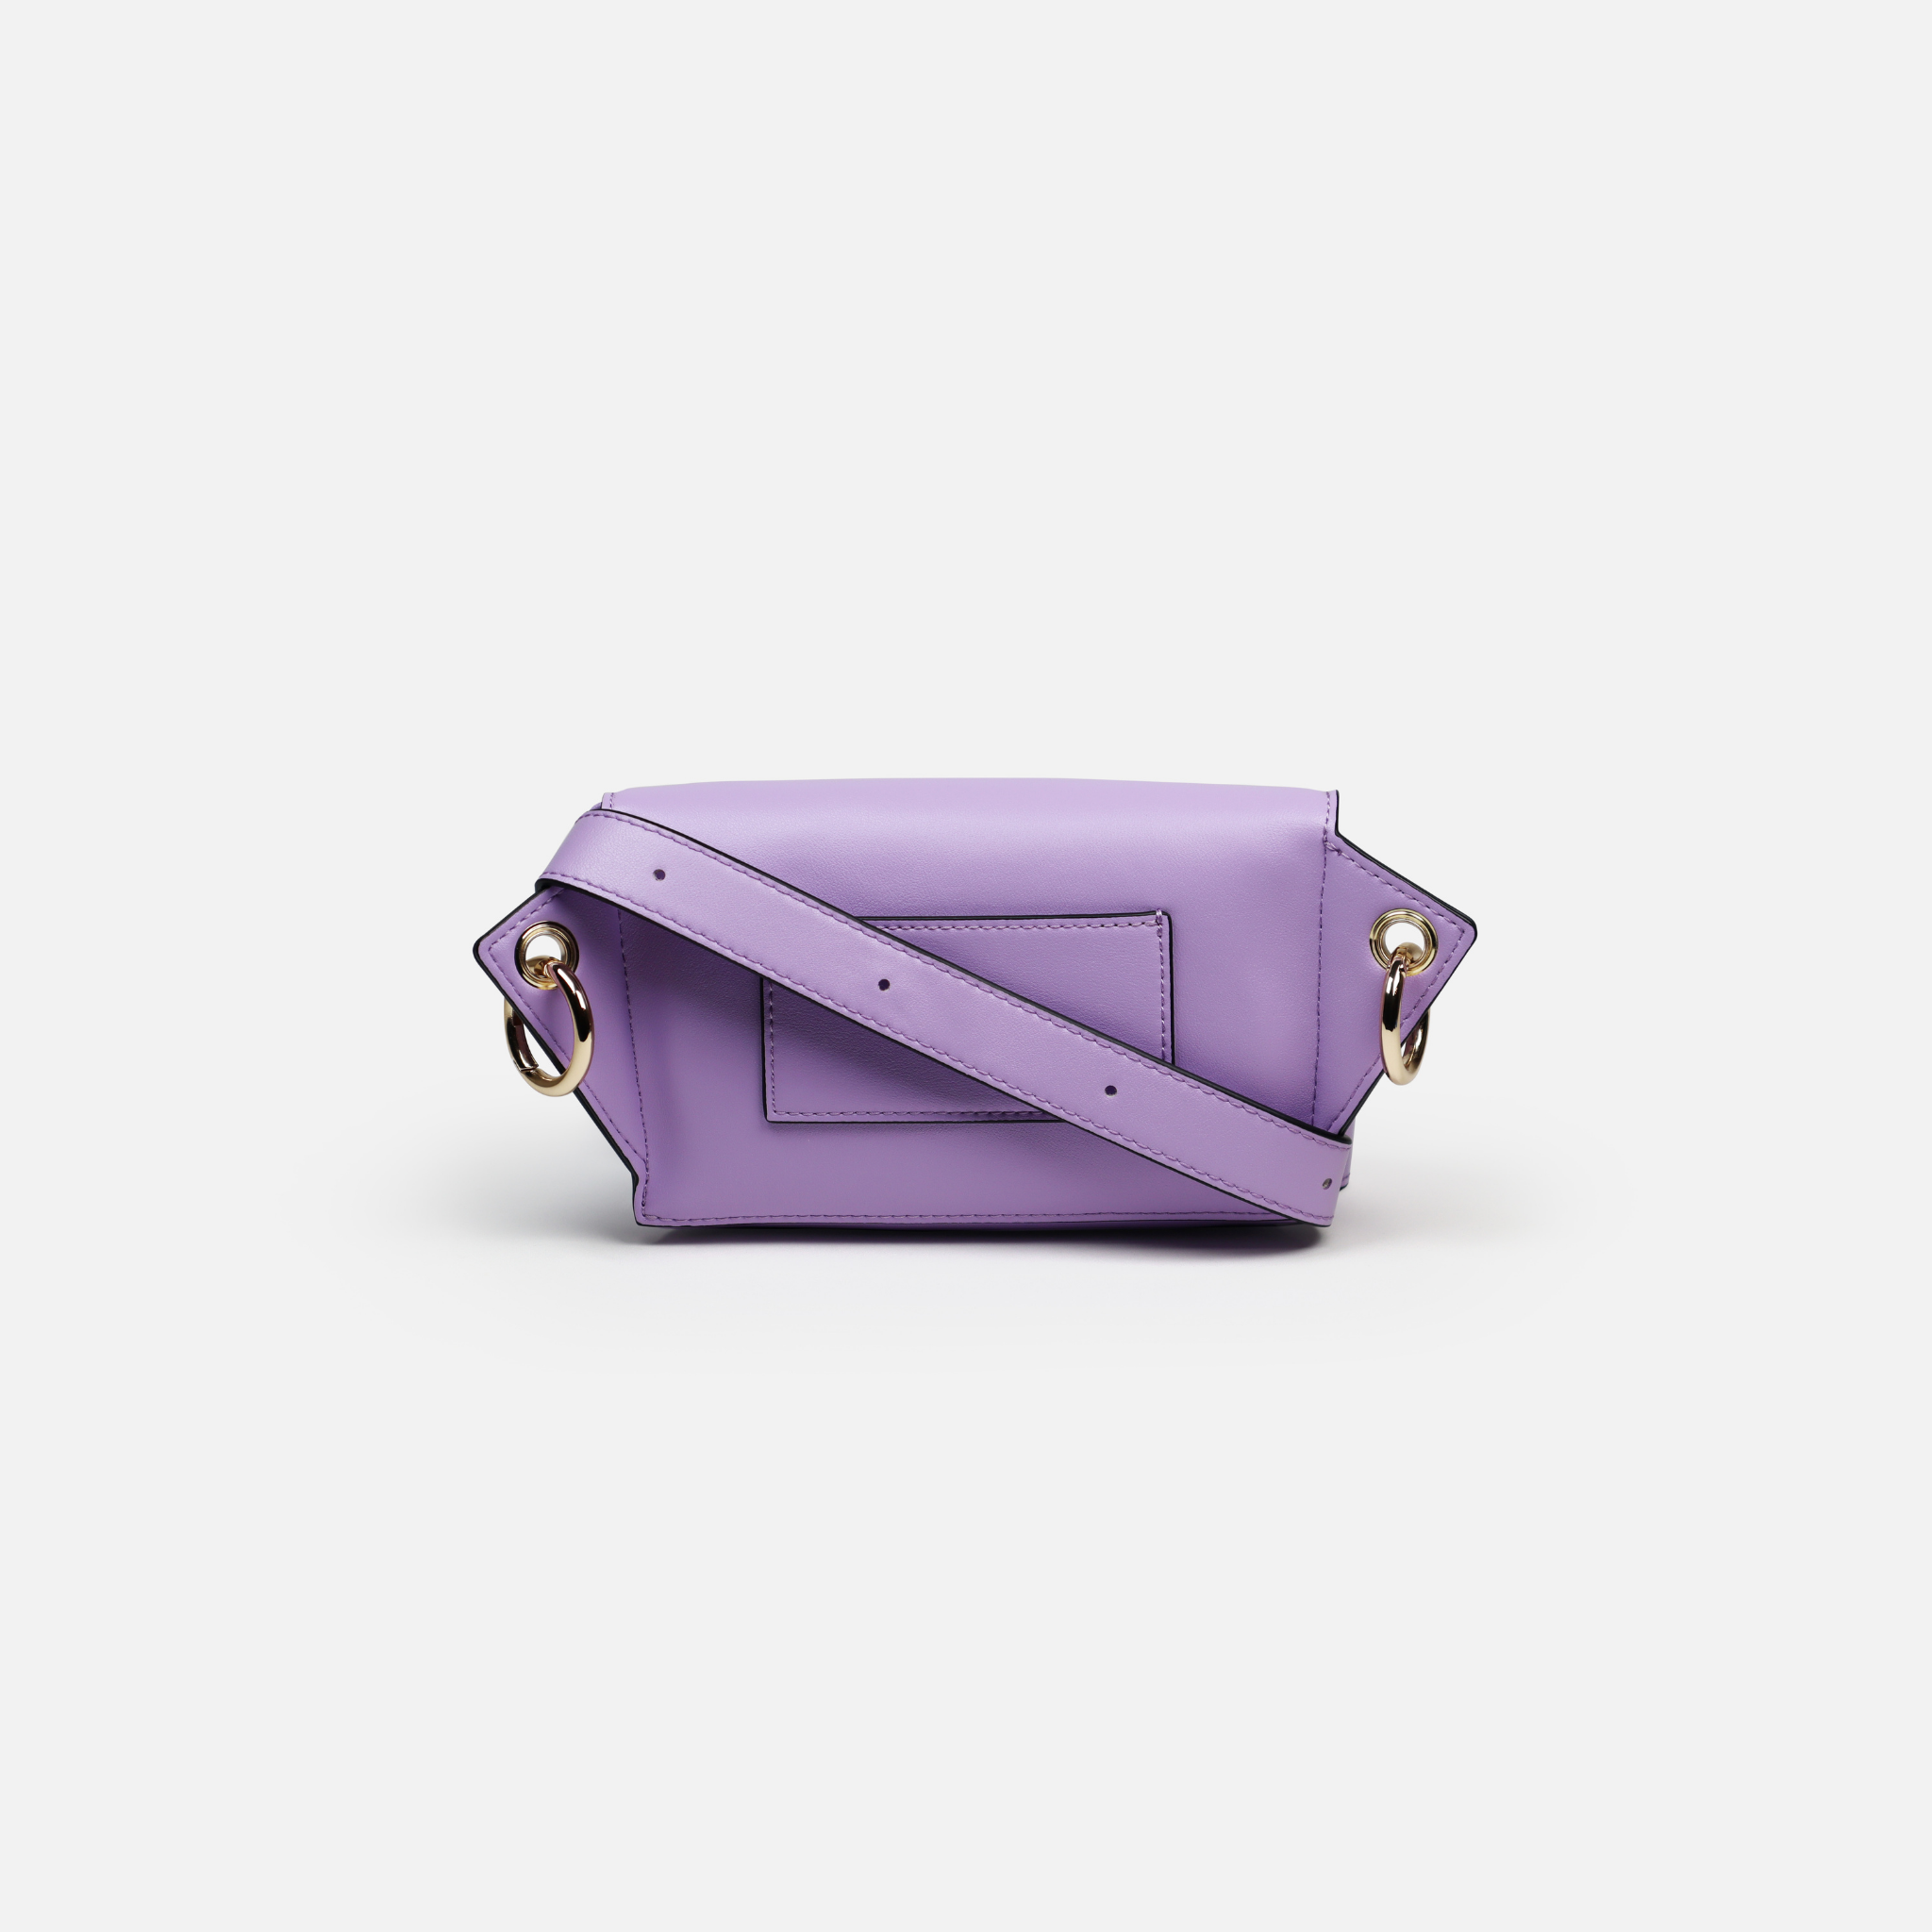 LOM Australia Leia Belt Bag in lilac. Back side with card pocket to fit three cards.